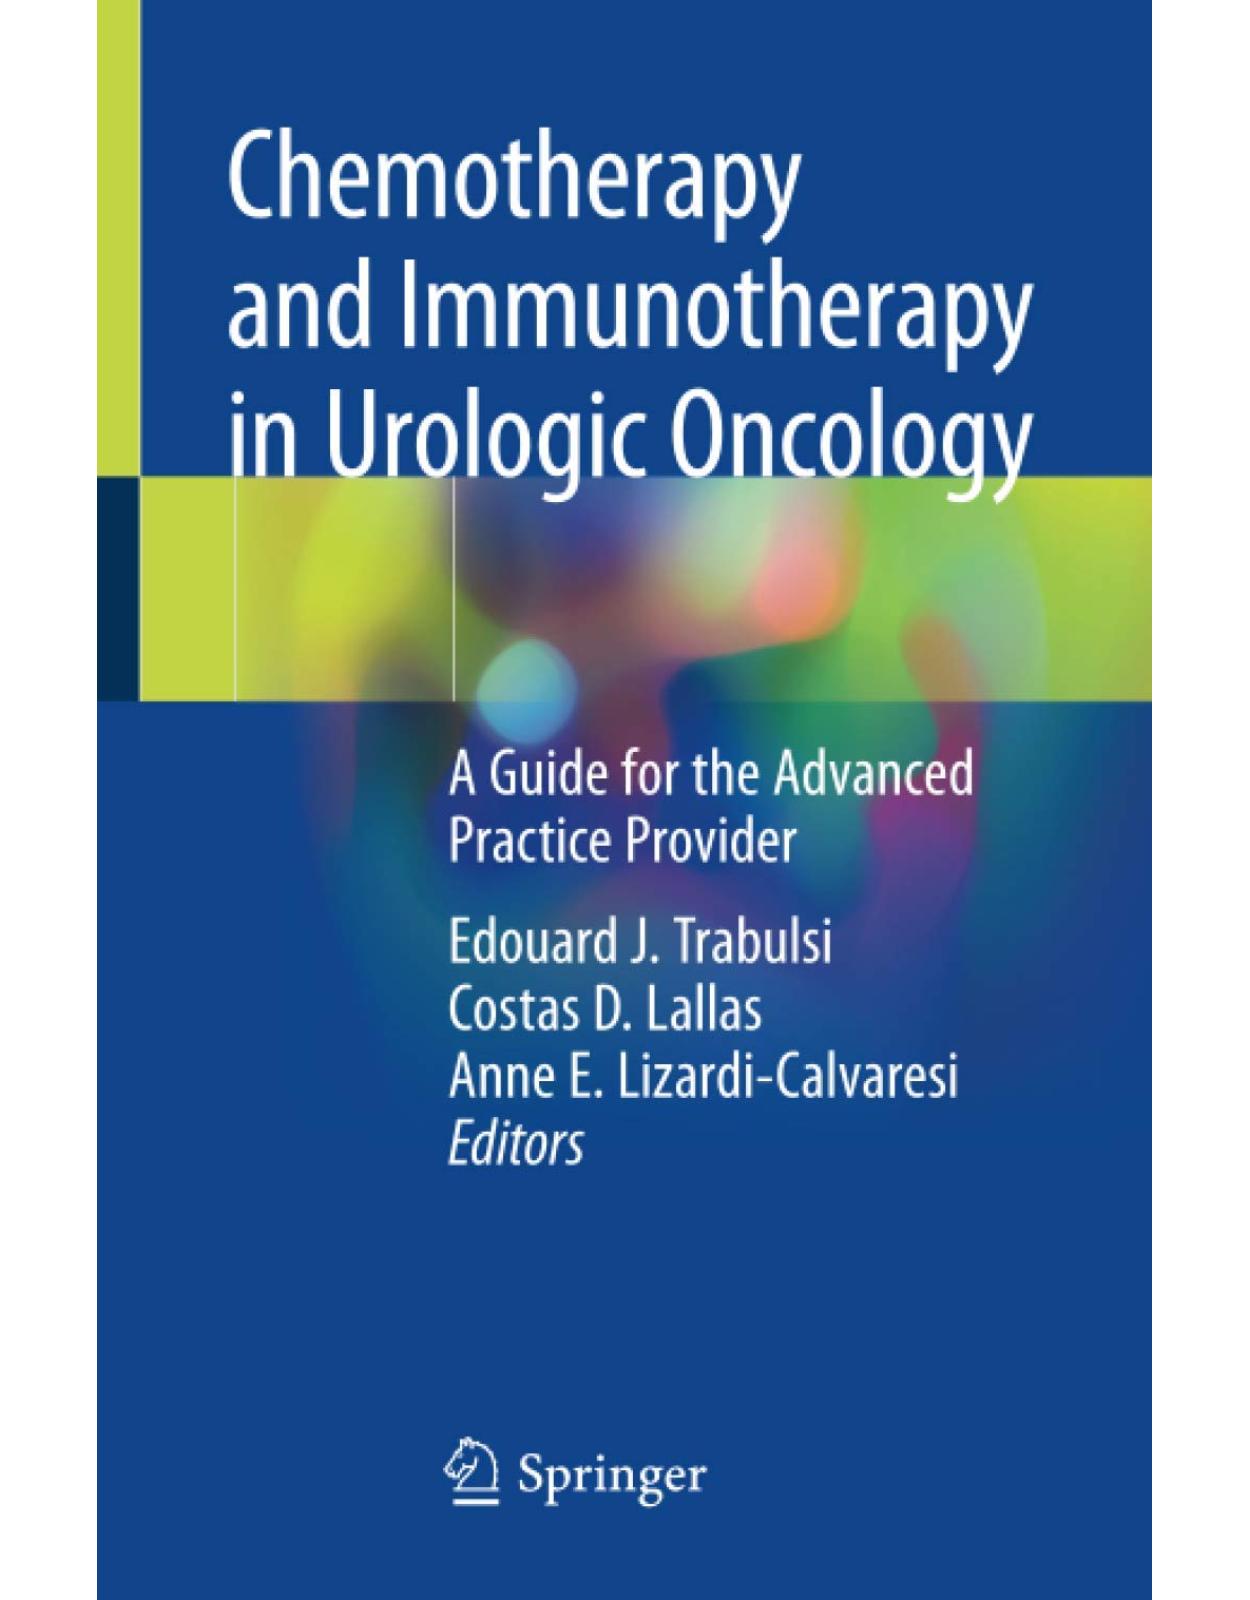 Chemotherapy and Immunotherapy in Urologic Oncology: A Guide for the Advanced Practice Provider 